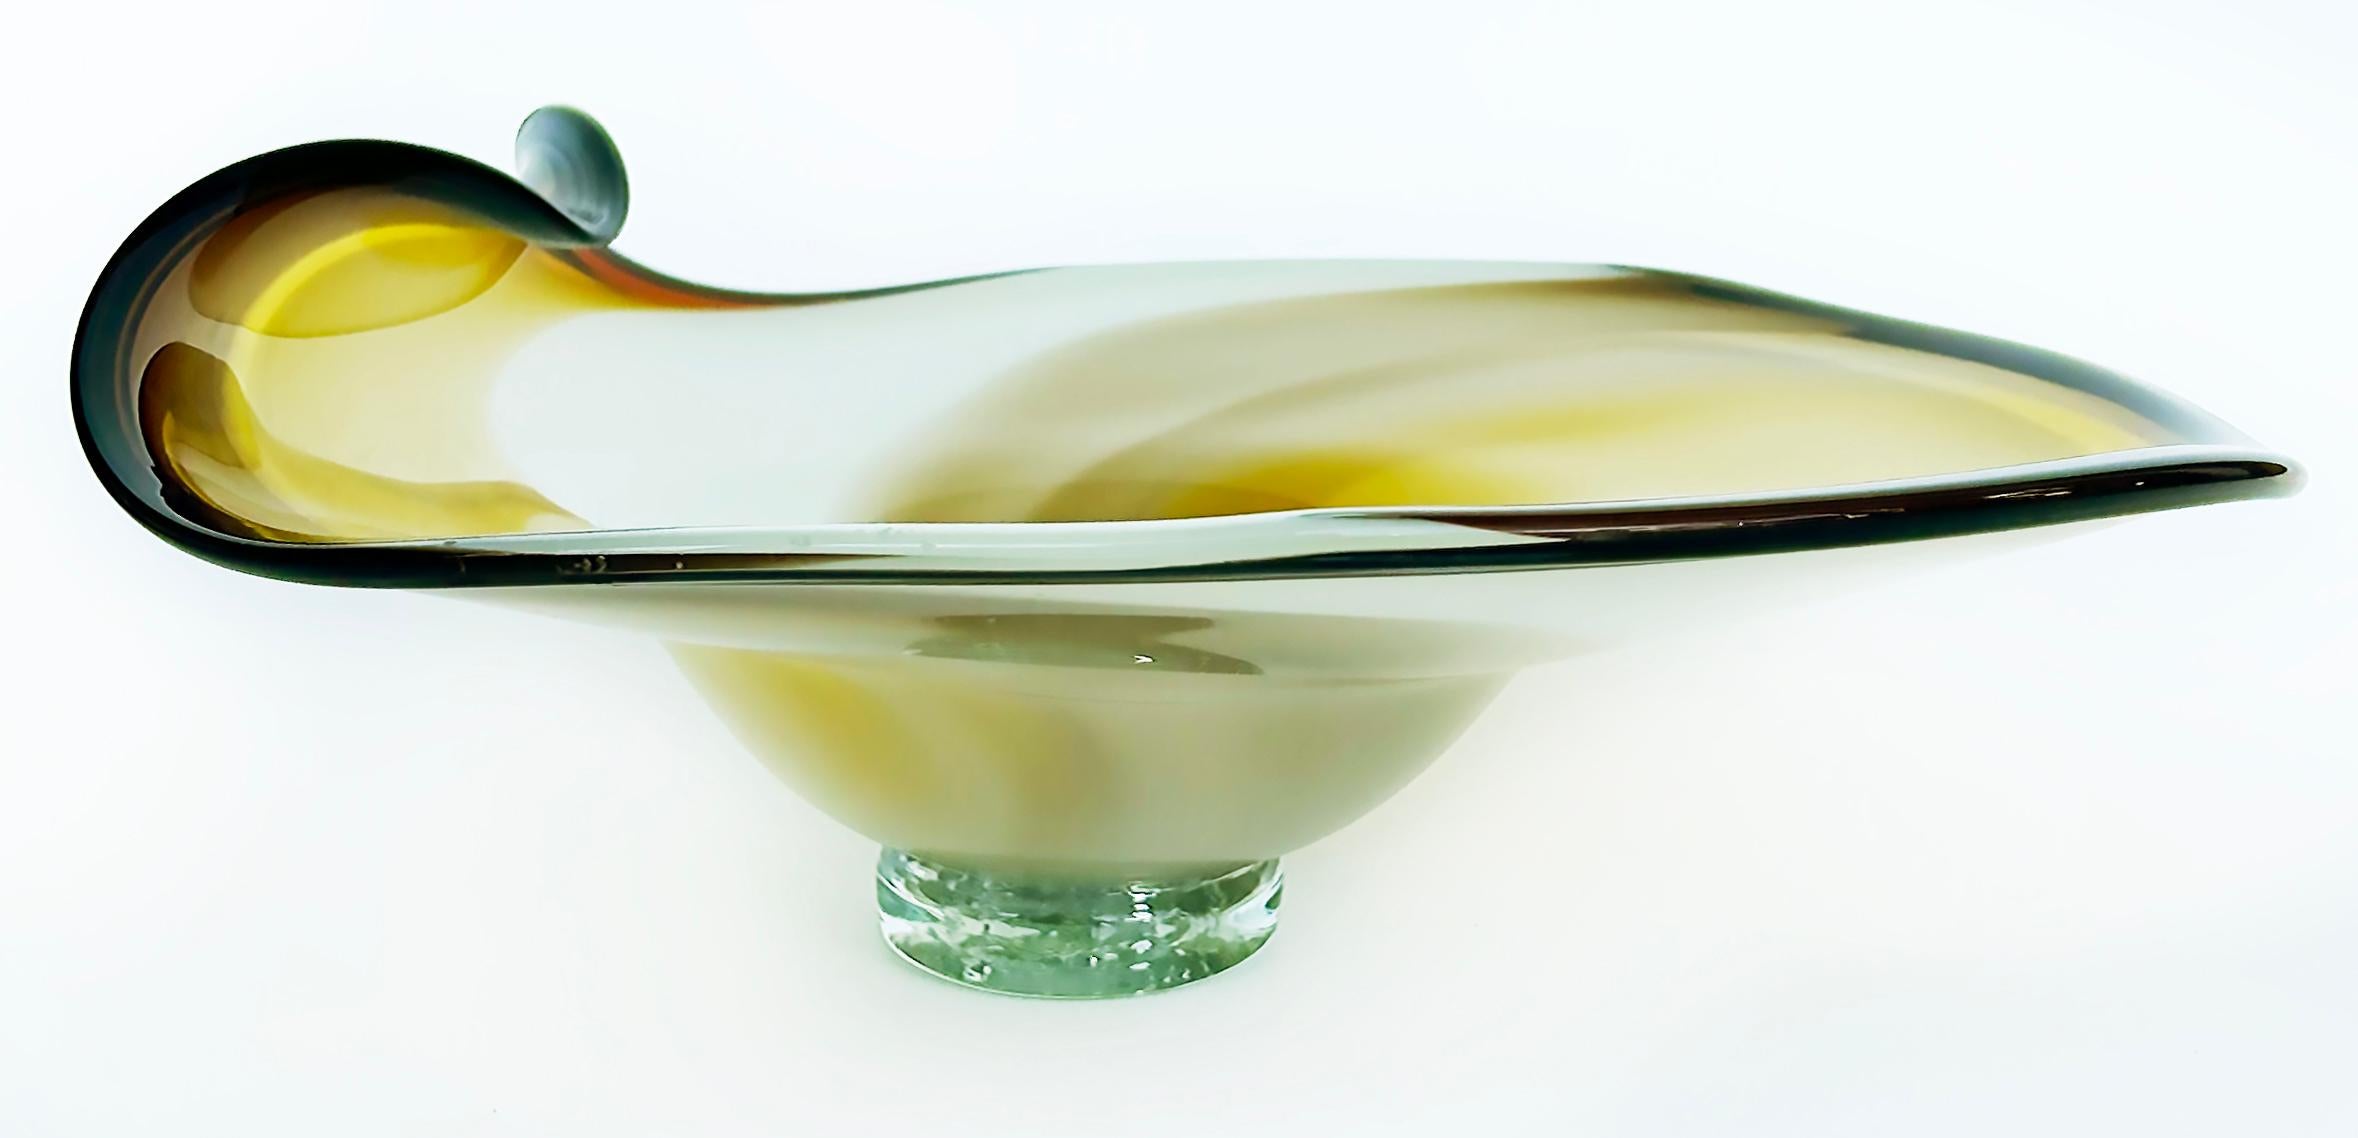 2006 Art Glass Centerpiece Bowl by John Nicholson Signed on Base, “The Wave” 

Offered for sale is an art glass 